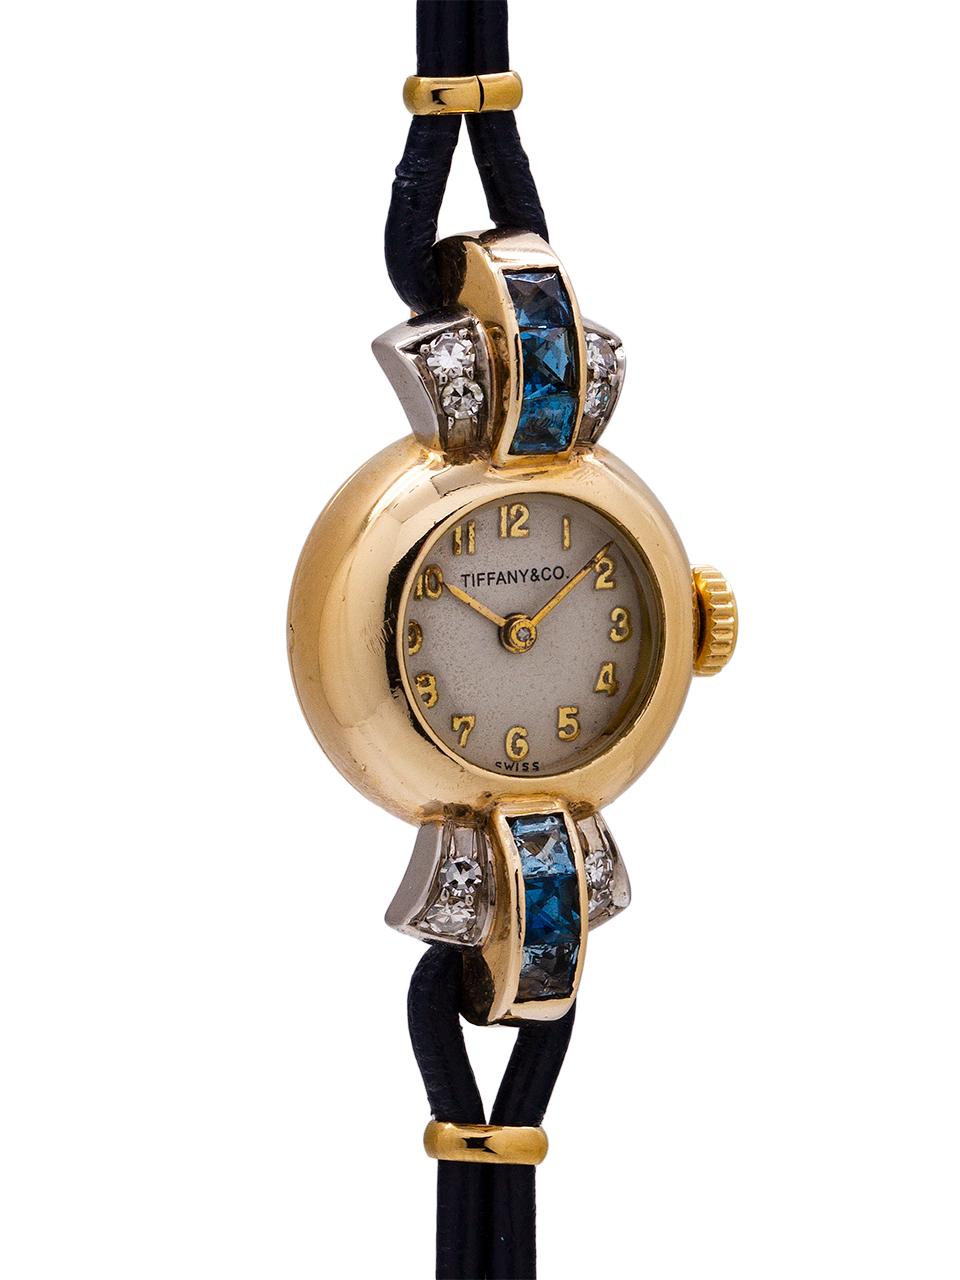 Vintage lady’s Tiffany & Co. 14K YG dress watch circa 1940’s. Beautiful design model with small distinctive dome shaped Cressarrow signed case and extended, curved triple pronged lugs, set with diamonds and sapphires. With contemporary cord leather